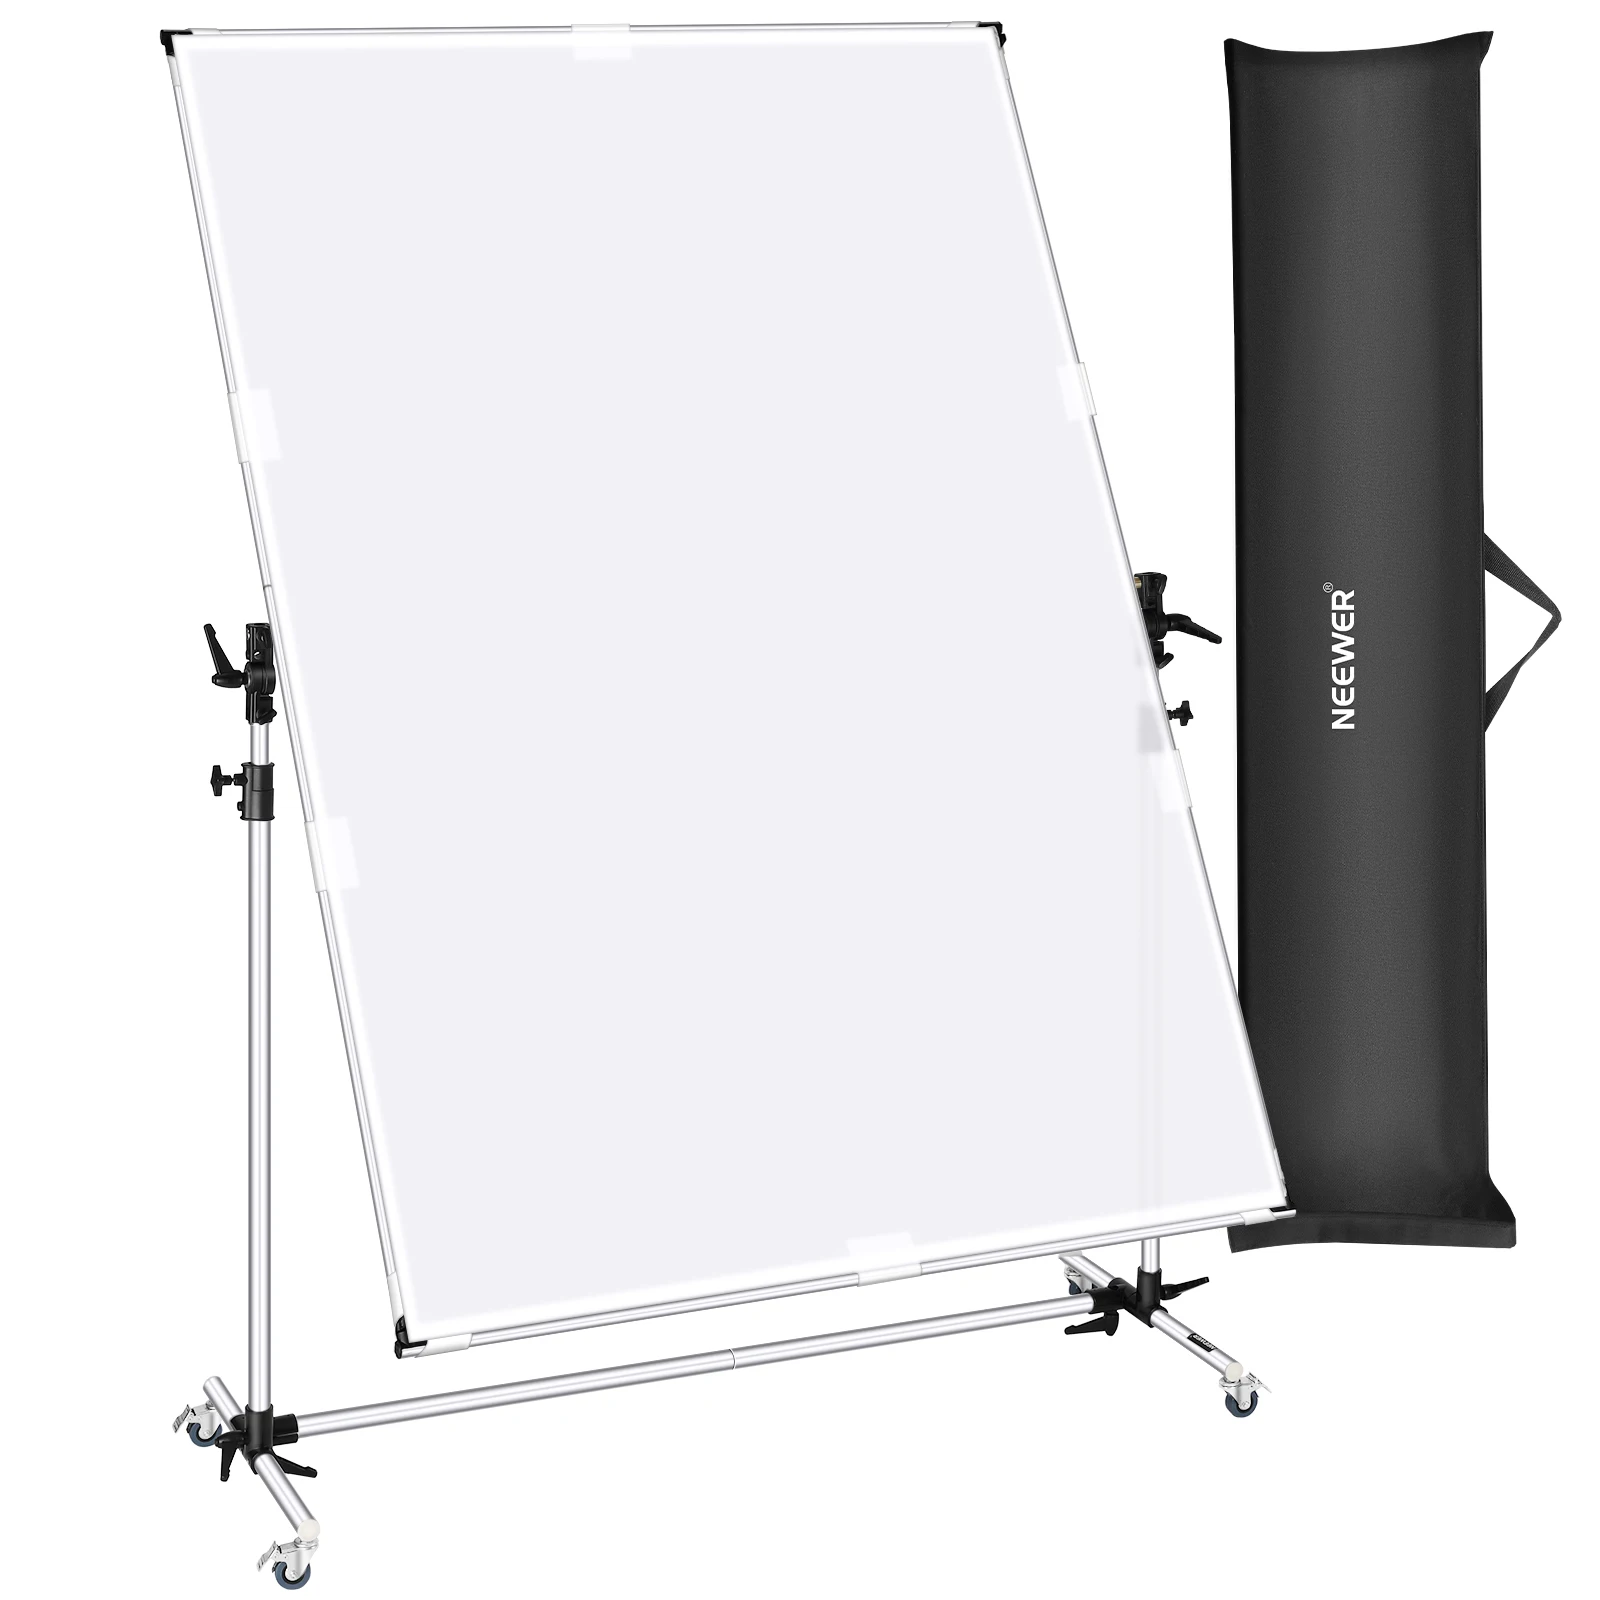 Video Shooting etc Neewer Photography Diffusion Paper Sheet 3.3x25.6feet/1x7.6 Meters Light Diffuser Filter Rollable Durable Waterproof for Photo Studio Product Portrait Photography 